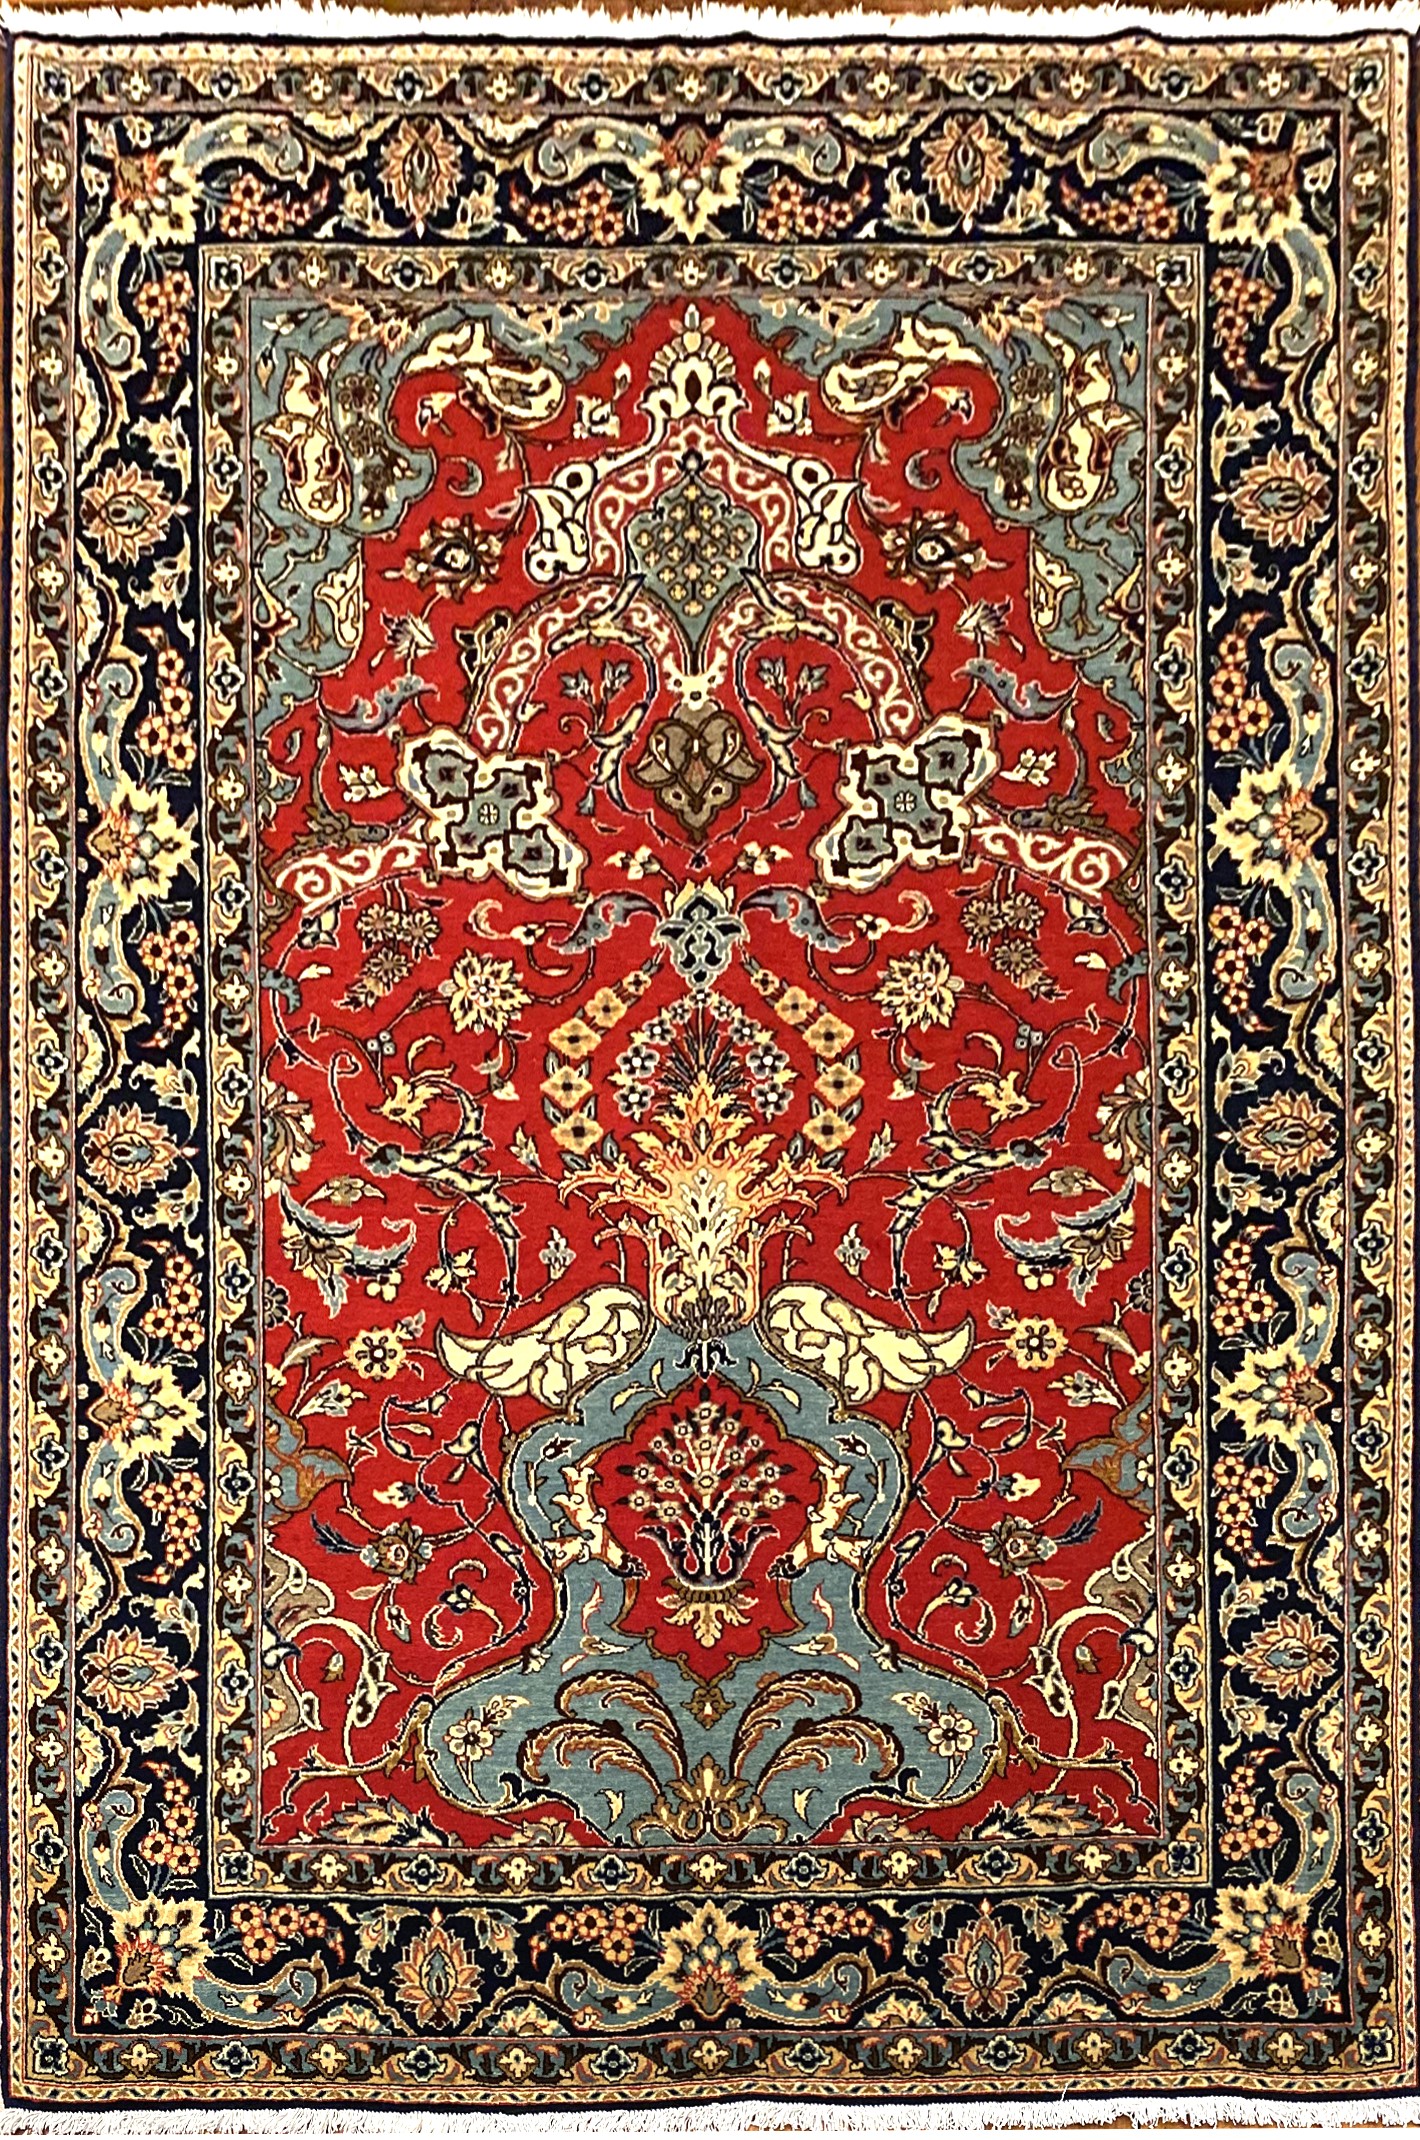 Rug# 5852, vintage Qum wool pile, circa 1945, silk inlay, immaculate, Persia, size 210x140 cm, RRP $8000 , on special $3000 (3)